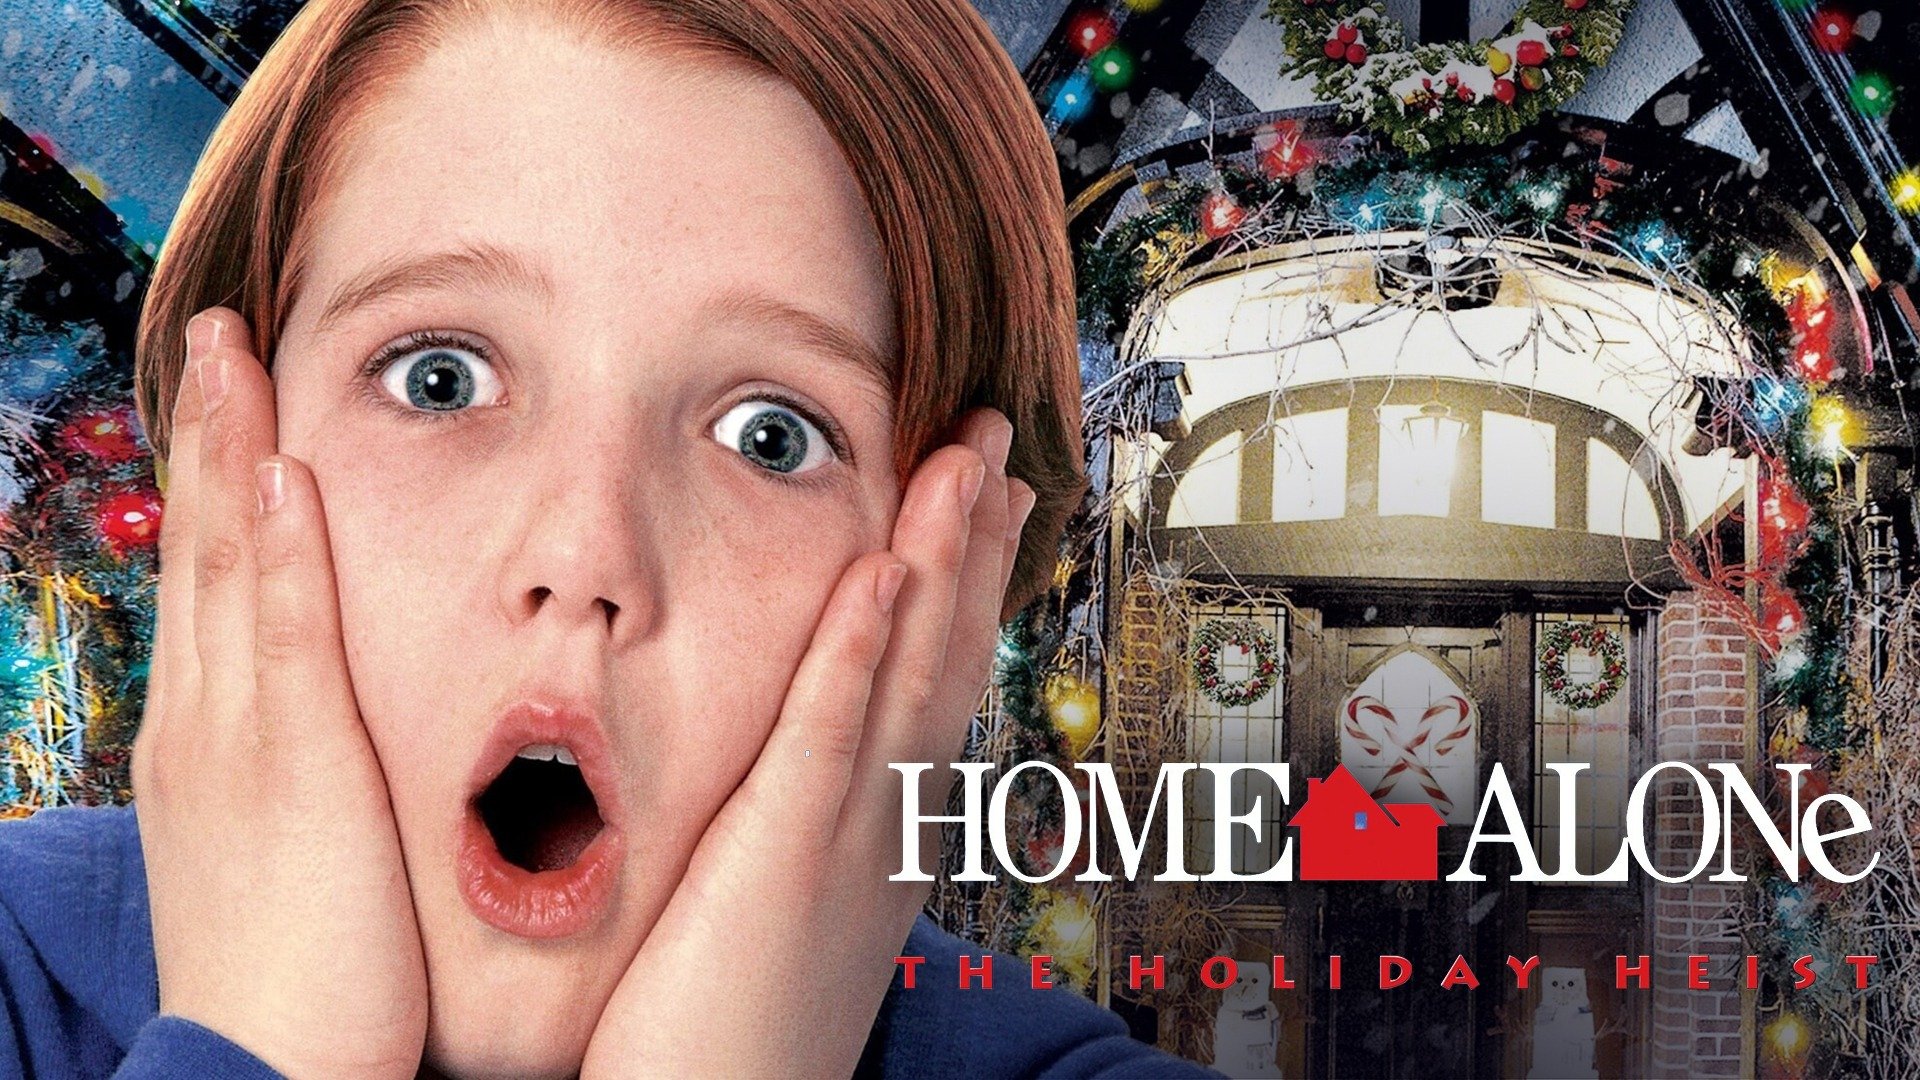 home alone 5 poster